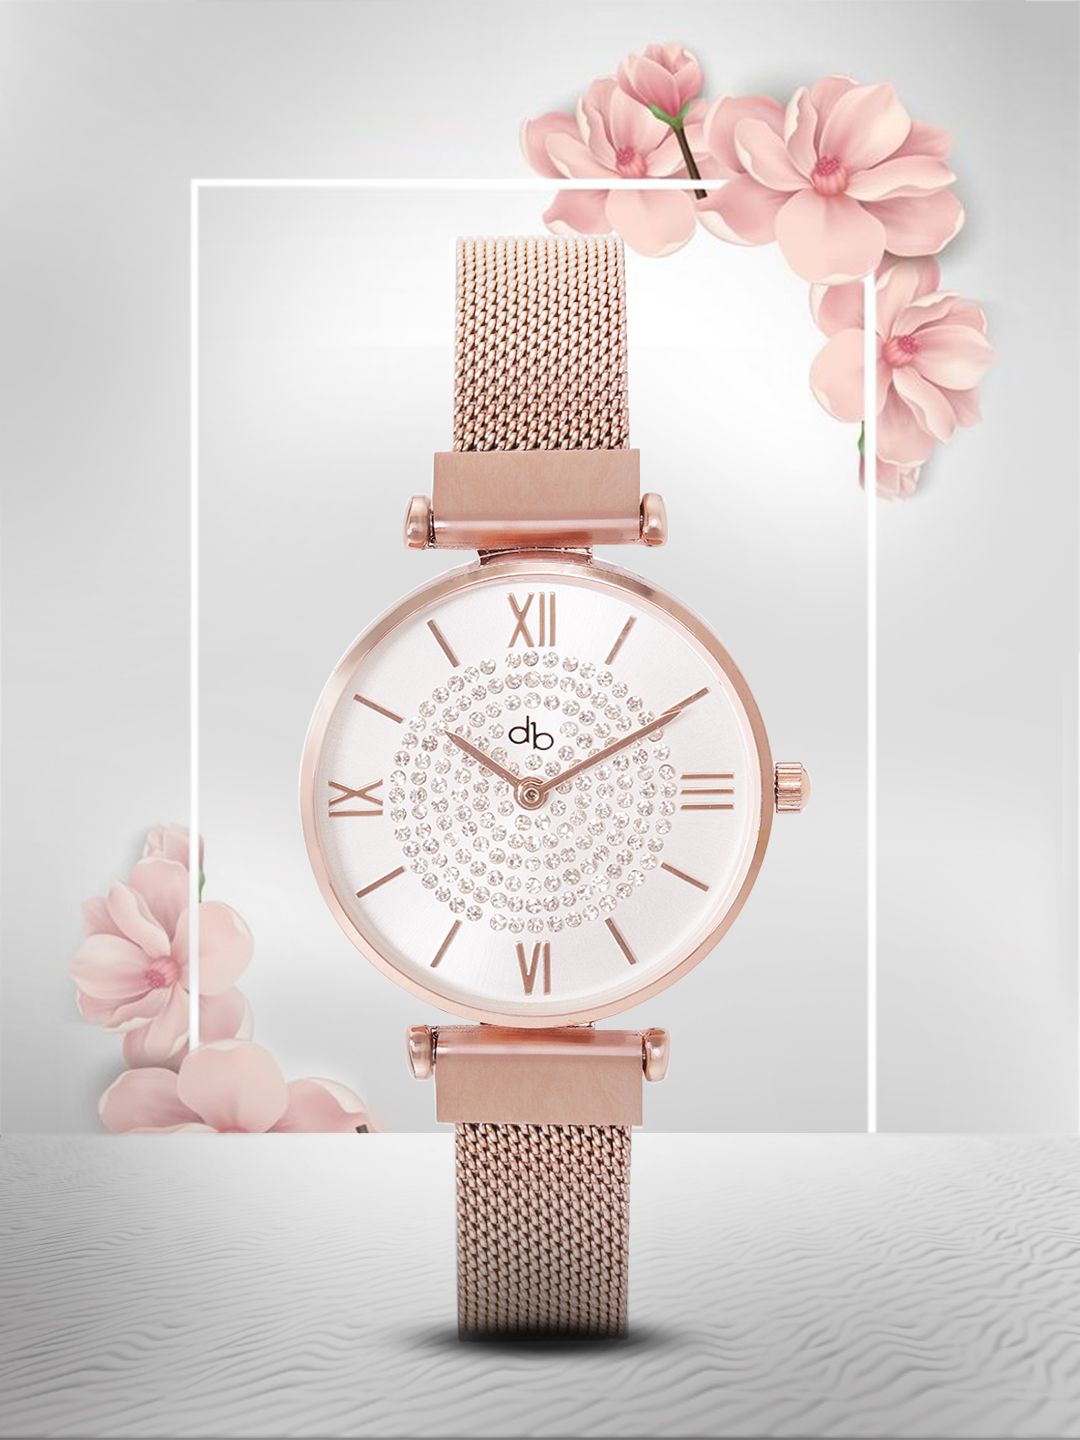 DressBerry Women Rose Gold-Toned Analogue Watch MFB-PN-LB-1236 Price in India